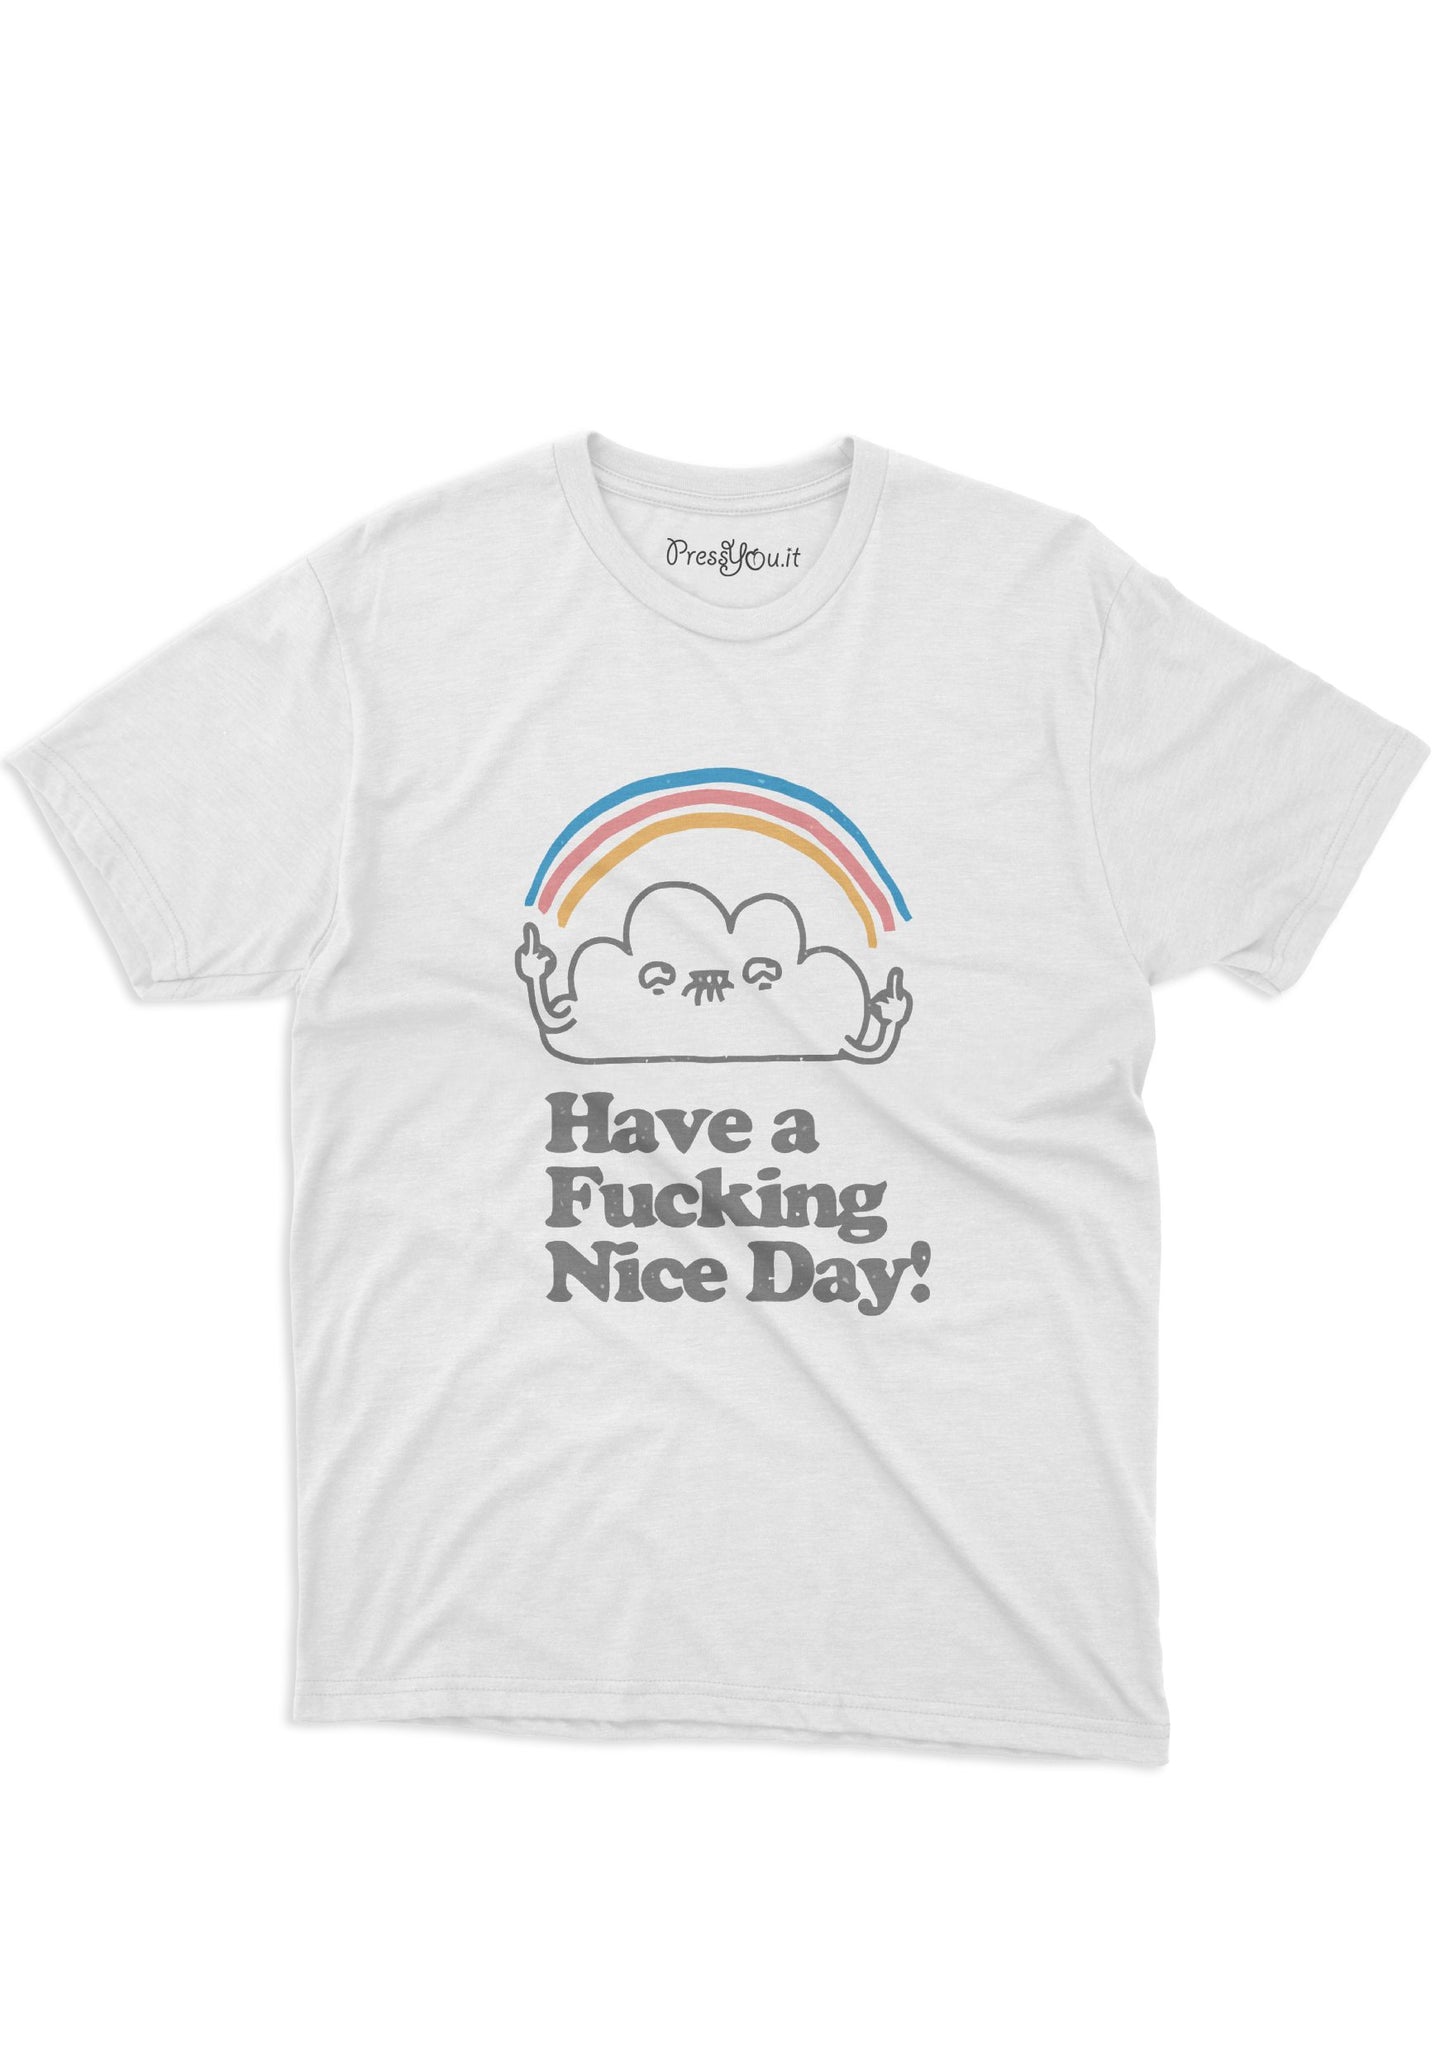 t-shirt-have a fucking nice day